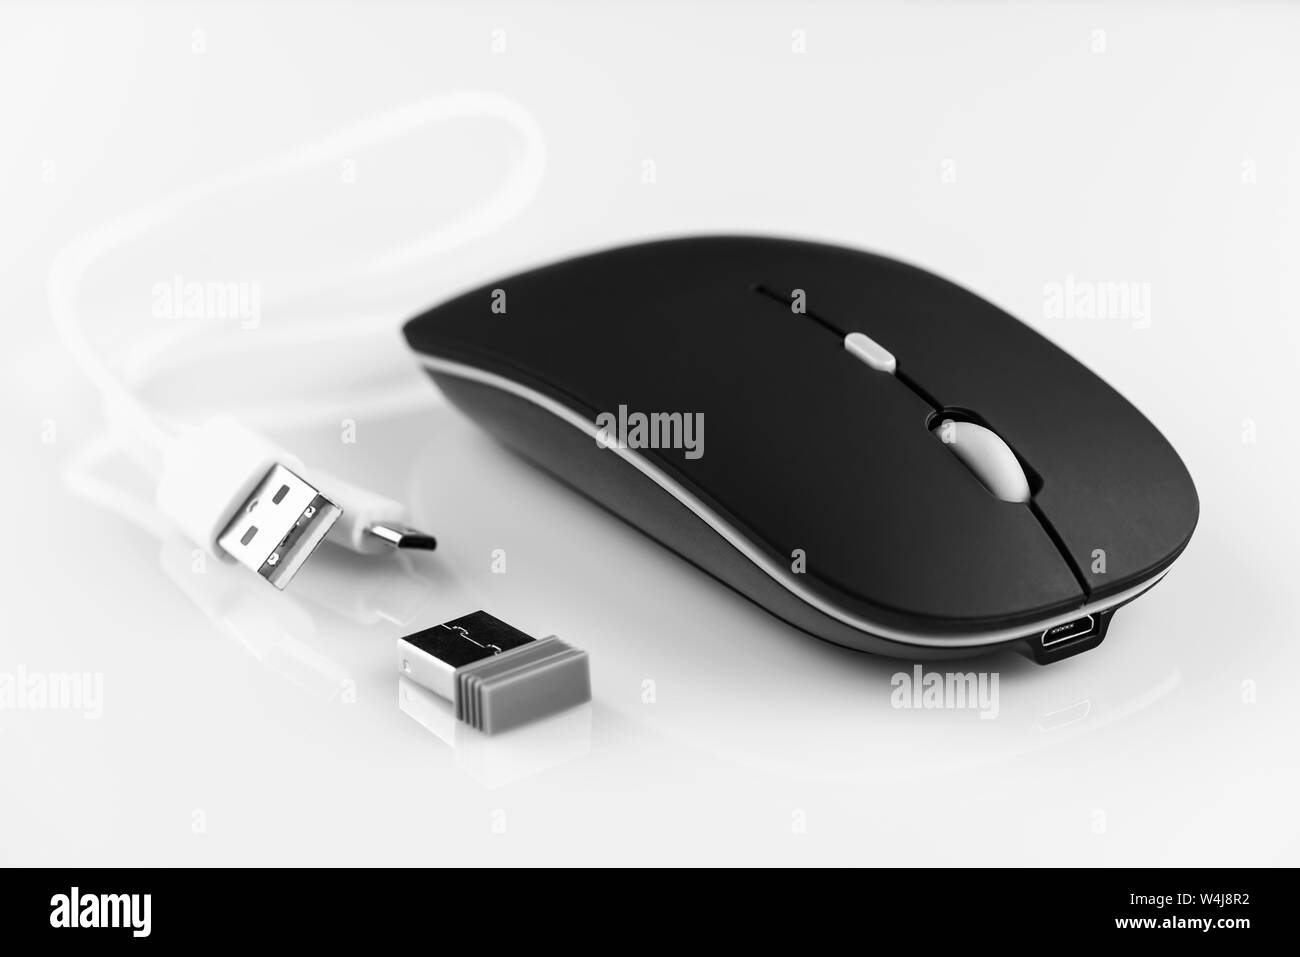 Black wireless computer mouse on a white background. There are a wi-fi adapter and a charging cable. Stock Photo